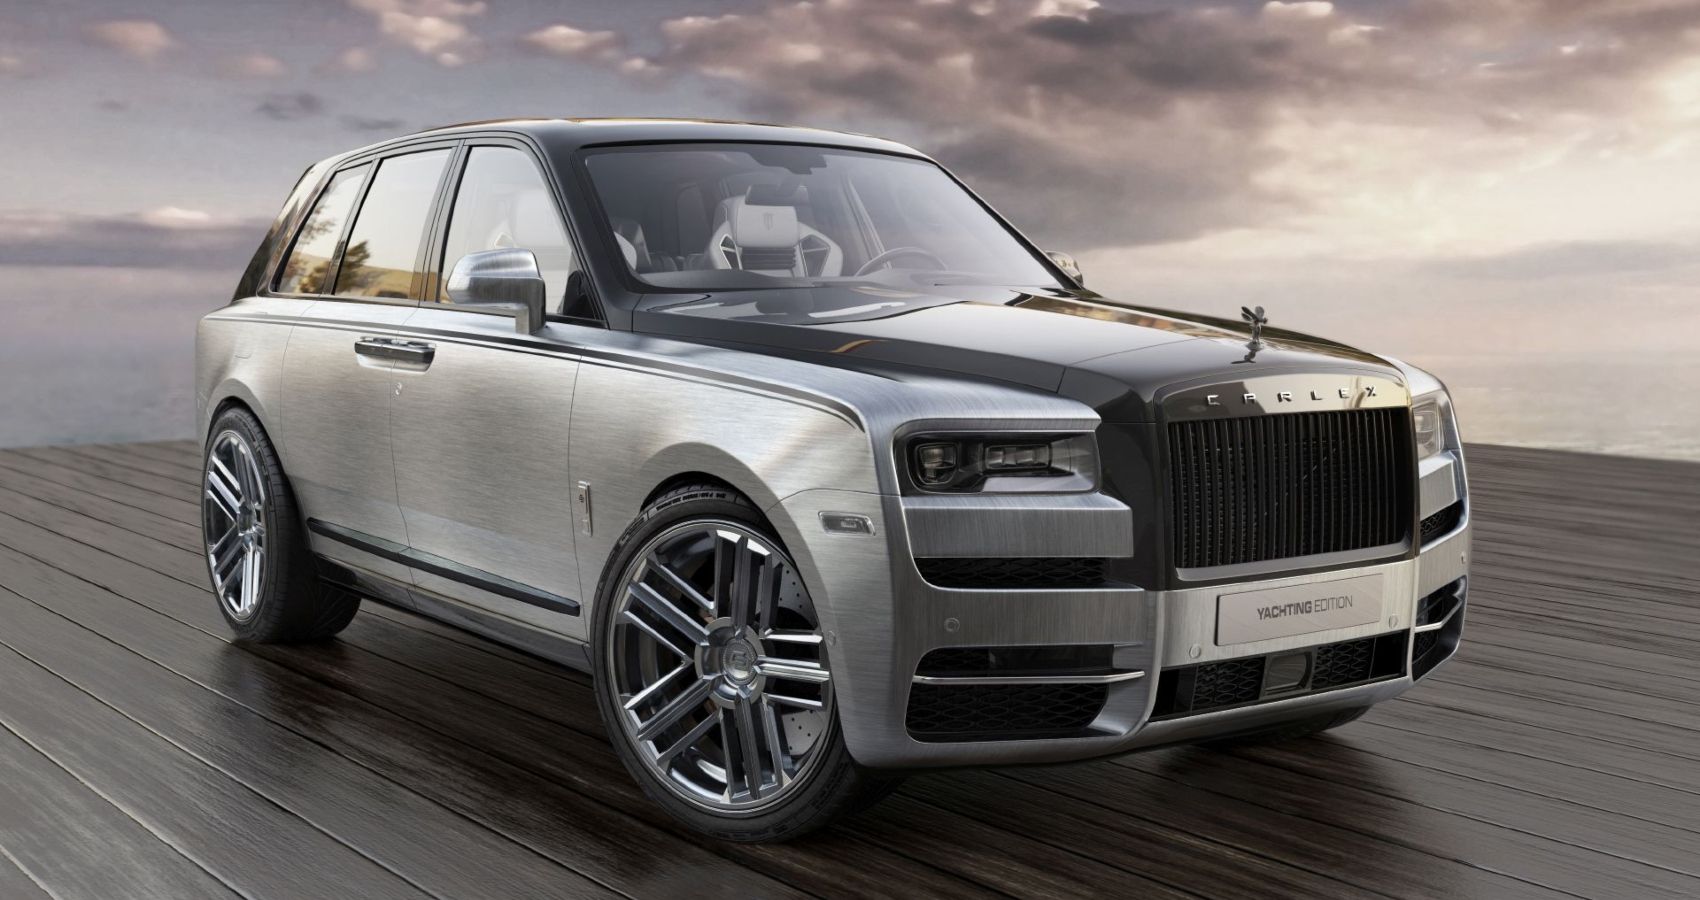 Front three quarter right view of Rolls Royce Cullinan Yachting Edition by Carlex Design